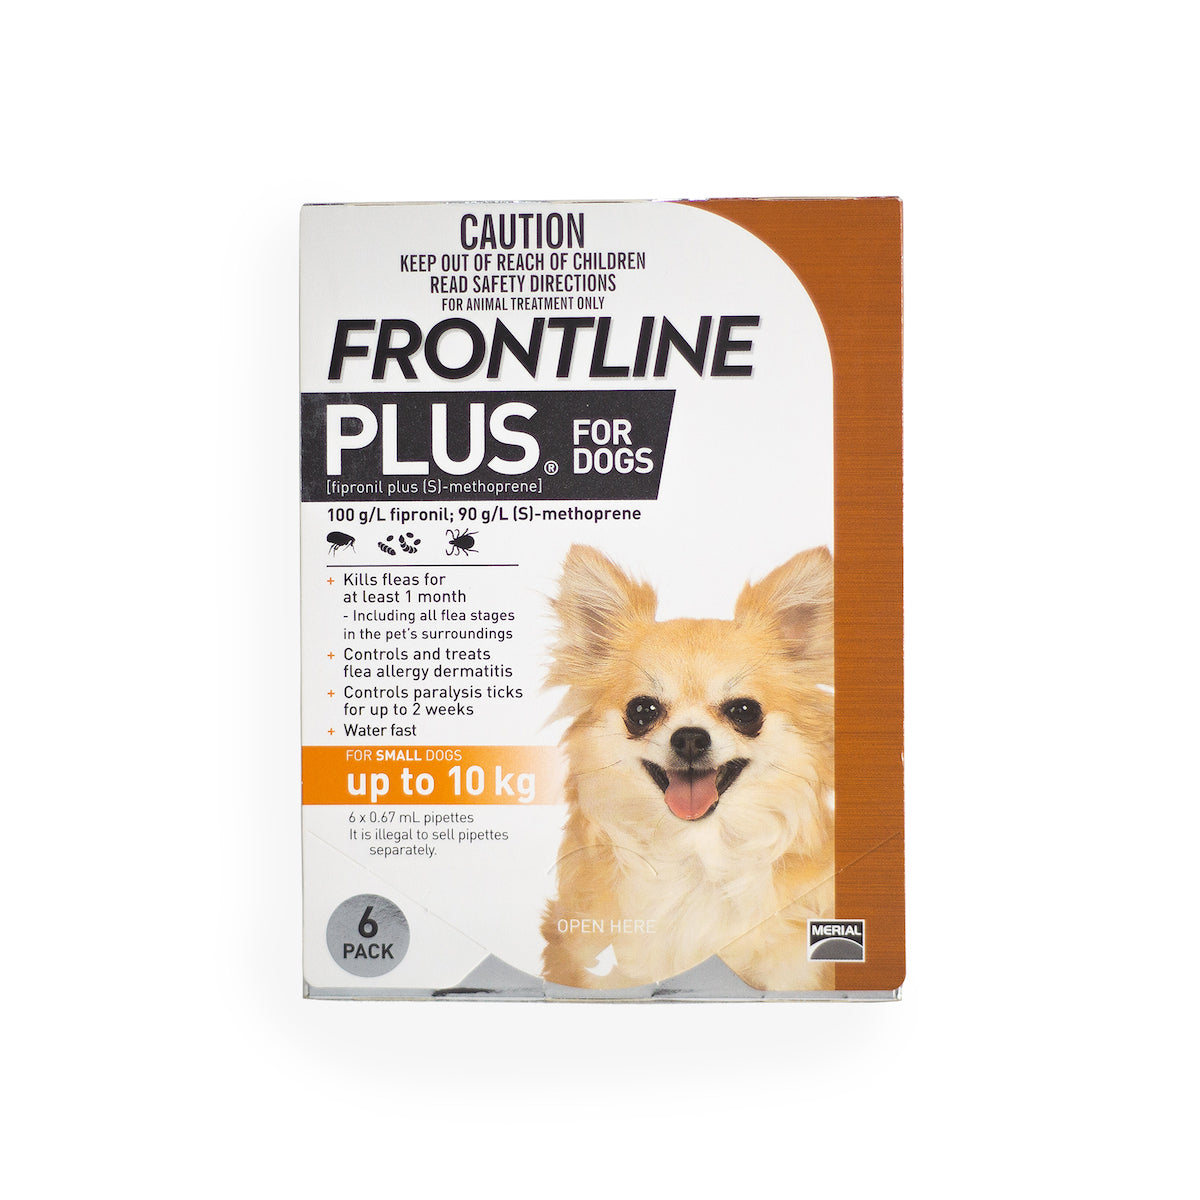 FRONTLINE FLEA & TICK PLUS FOR SMALL DOGS AND PUPPIES (ORANGE) (<10kg) 3'S